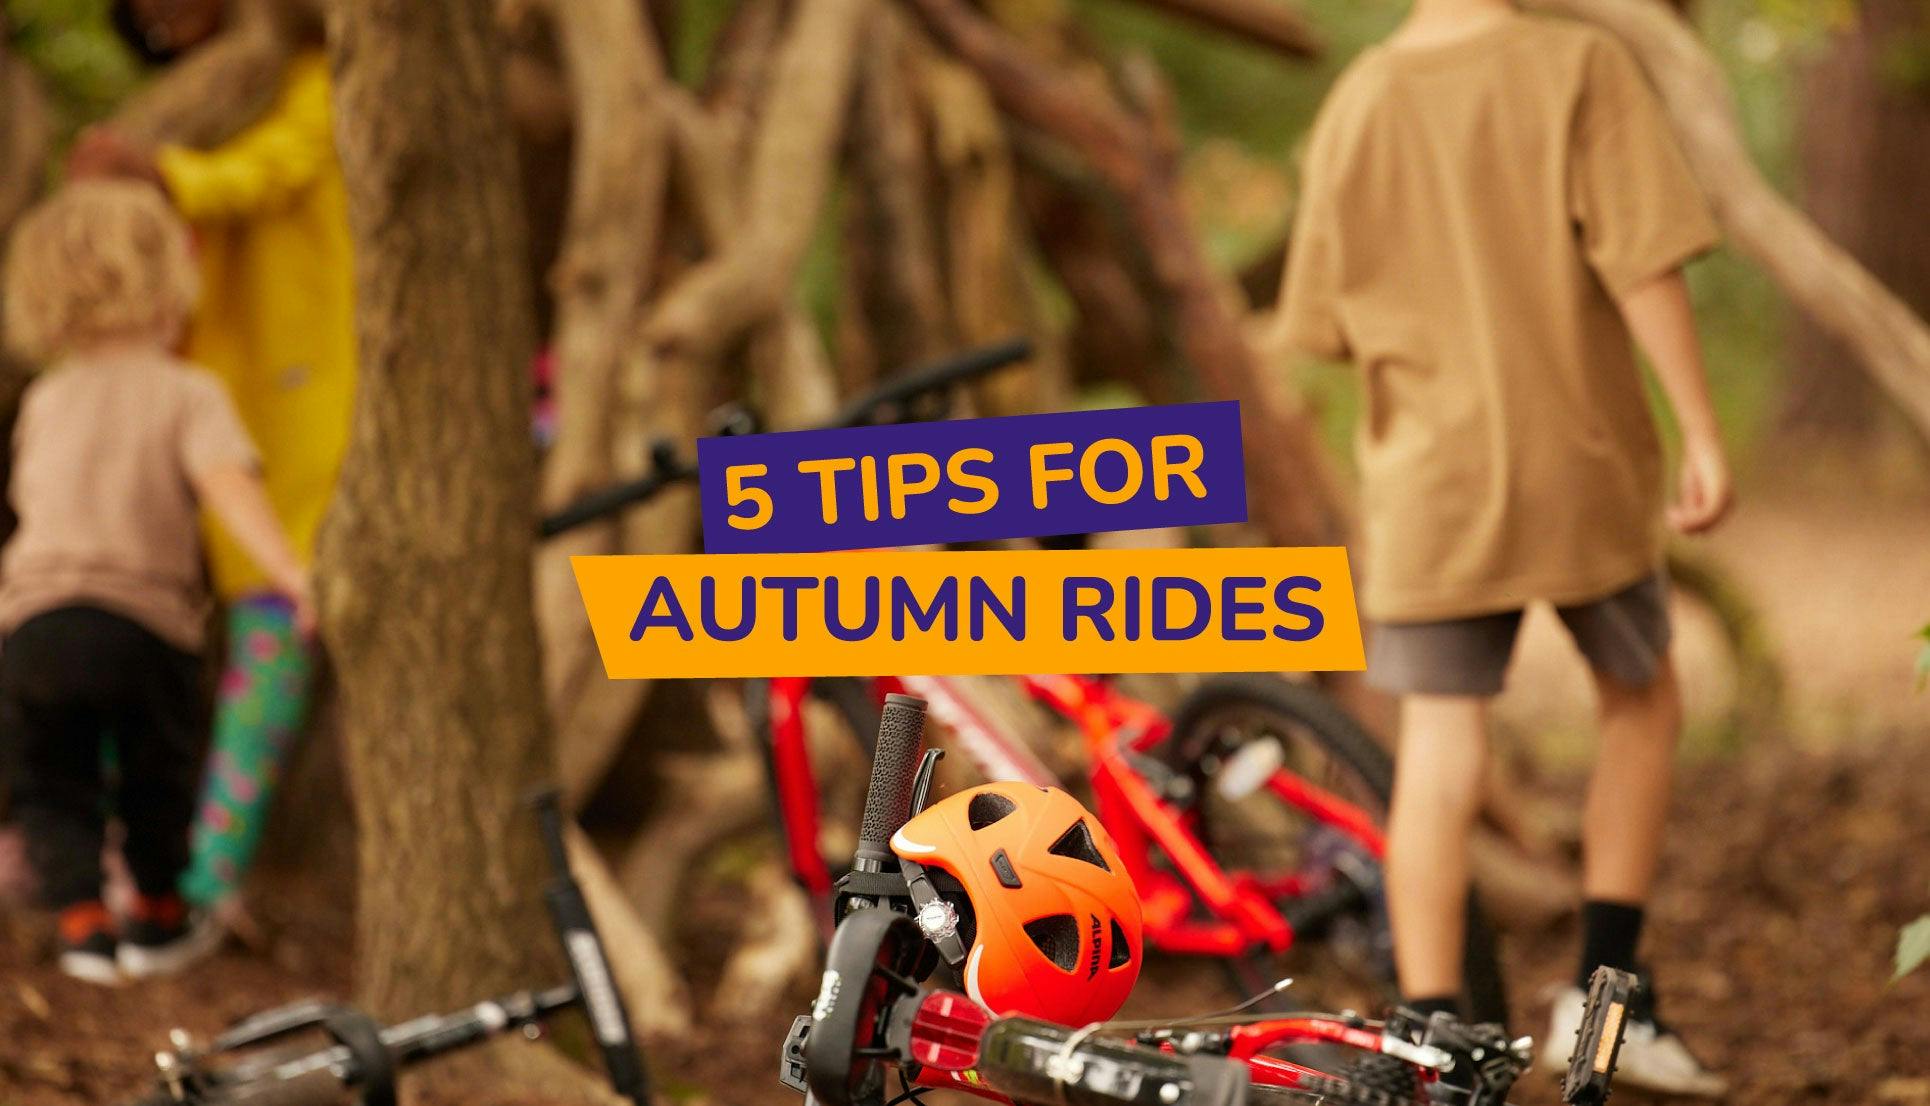 5 tips for autumn rides